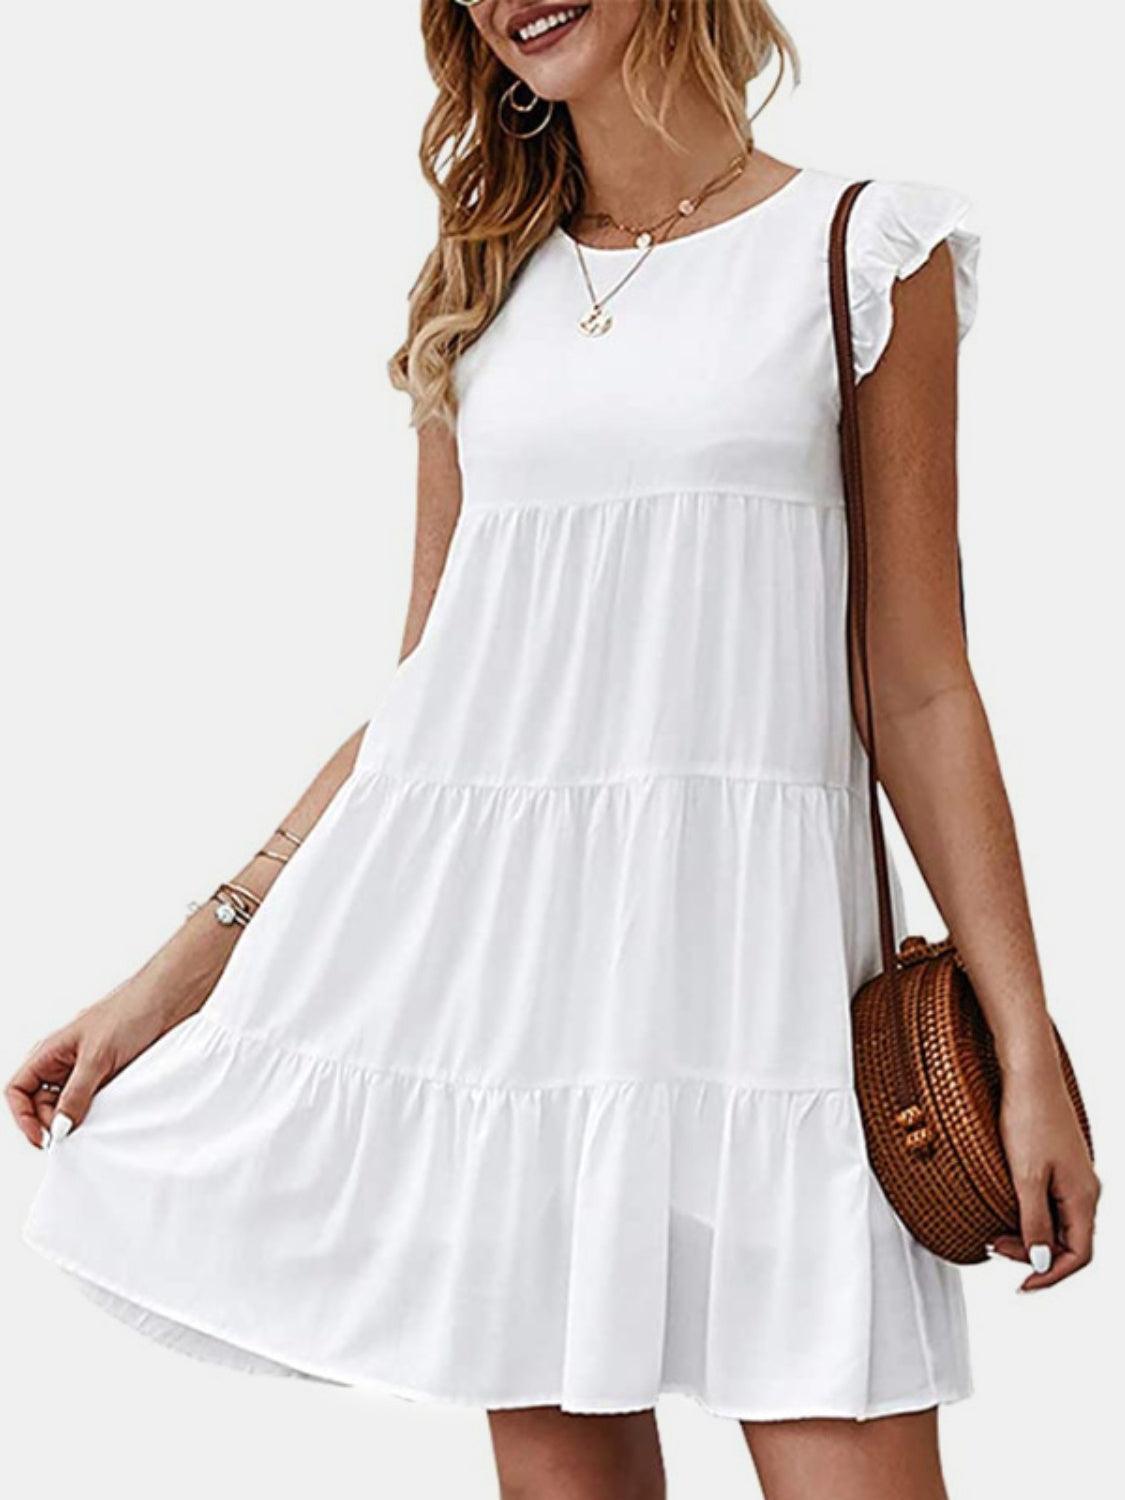 a woman wearing a white dress with a brown purse